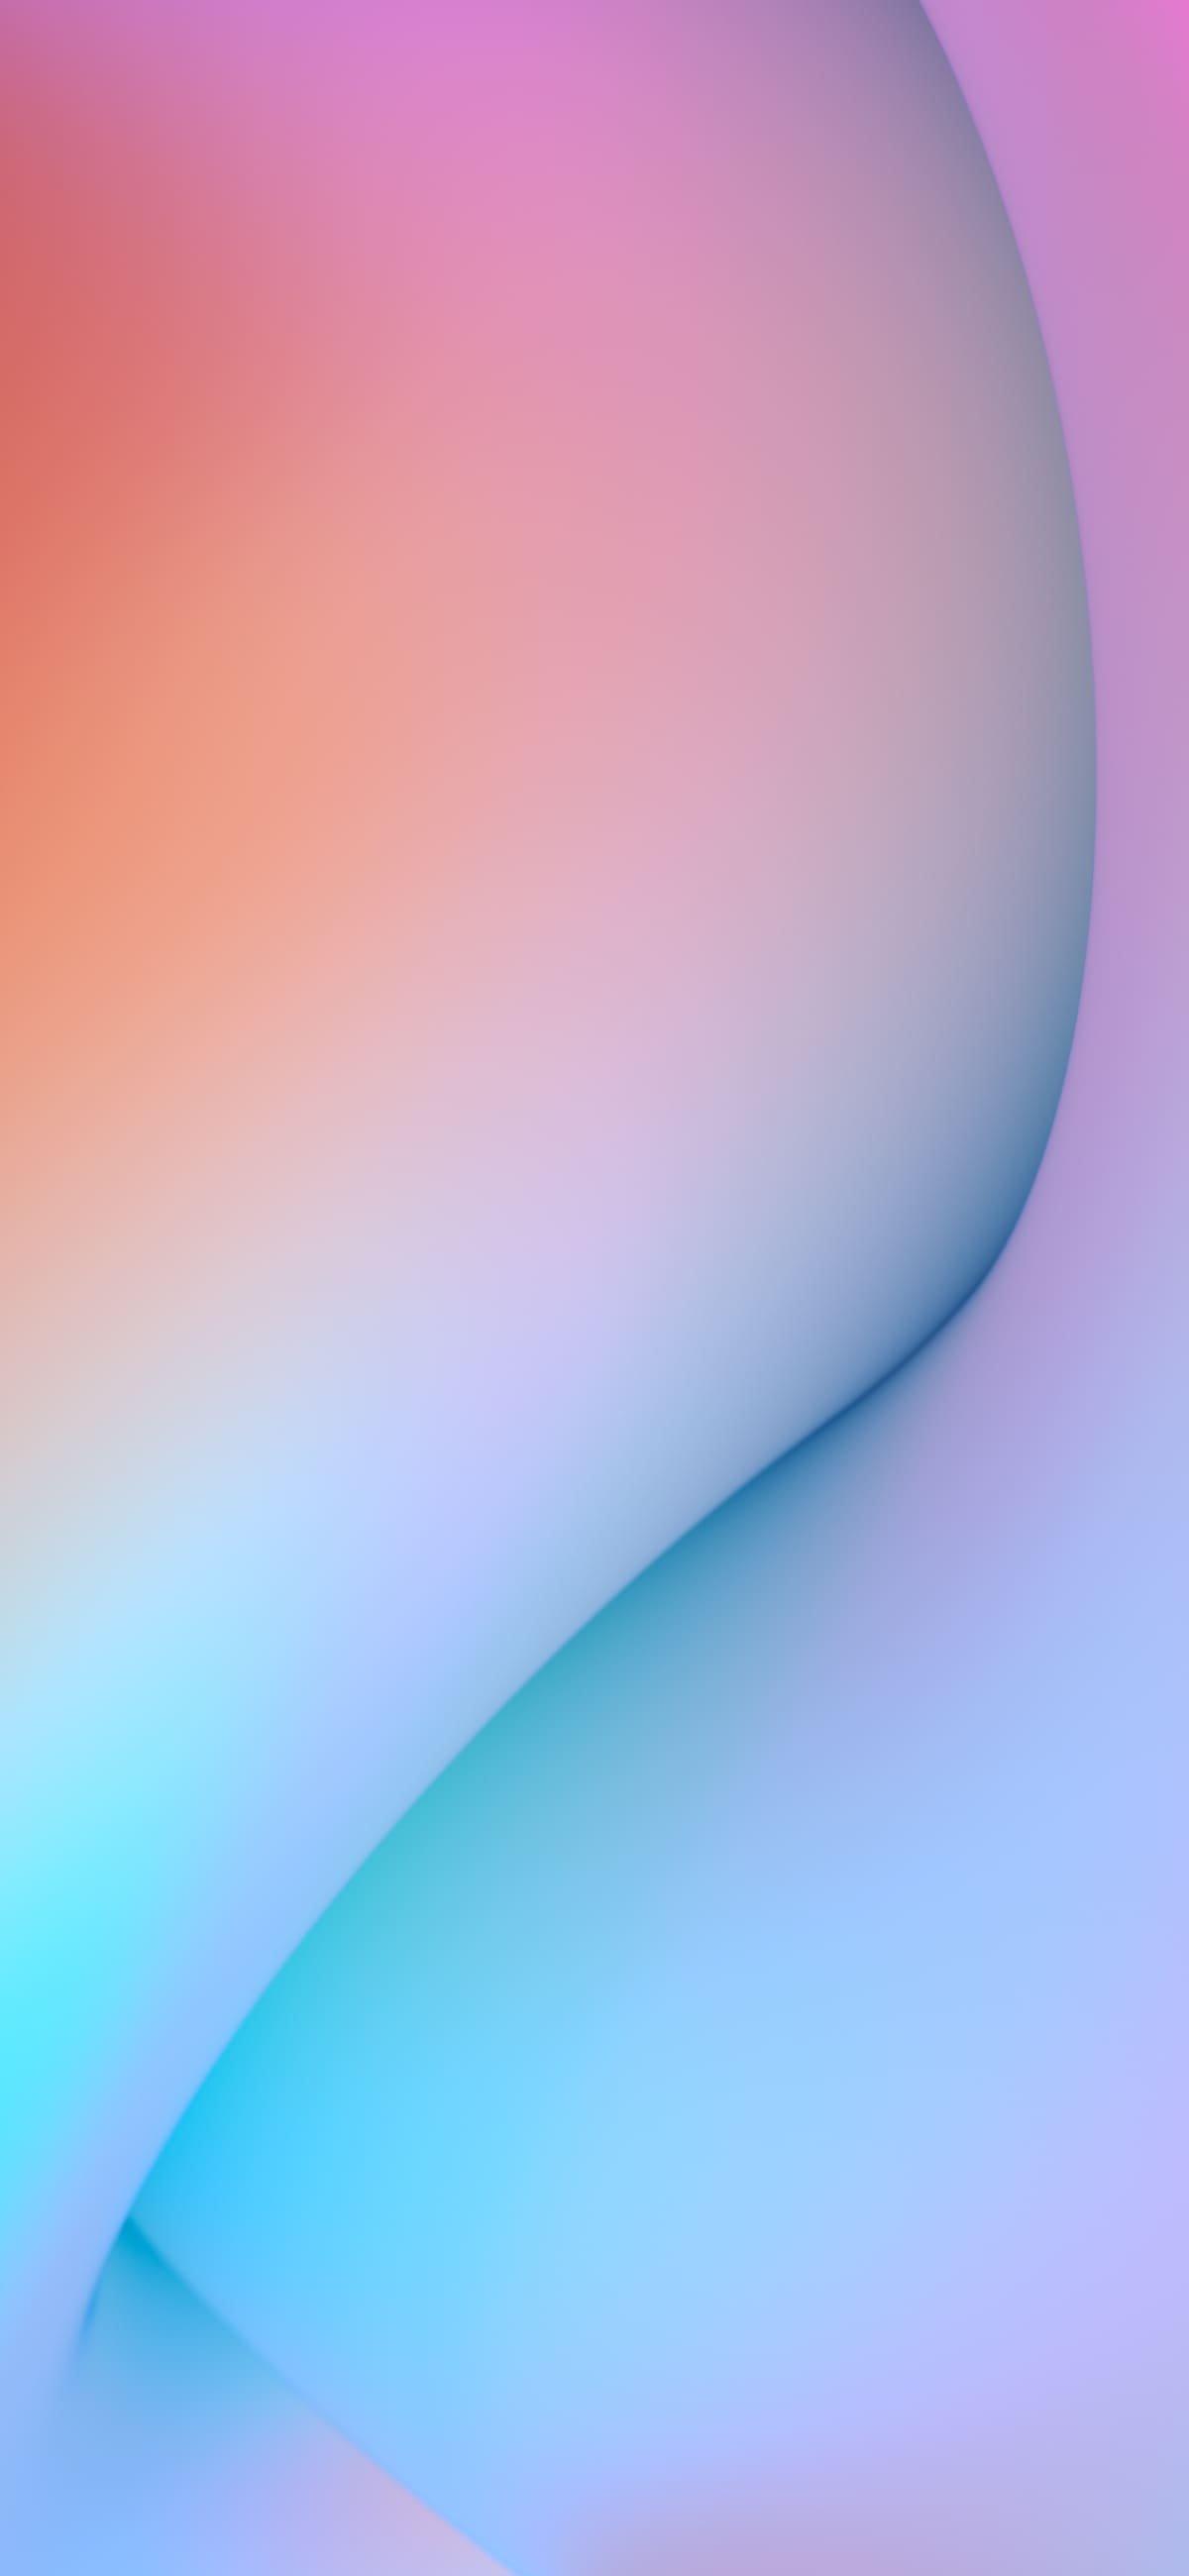 1200 x 2600 · jpeg - Download iOS 12 Wallpapers (8 Wallpapers) | DroidViews